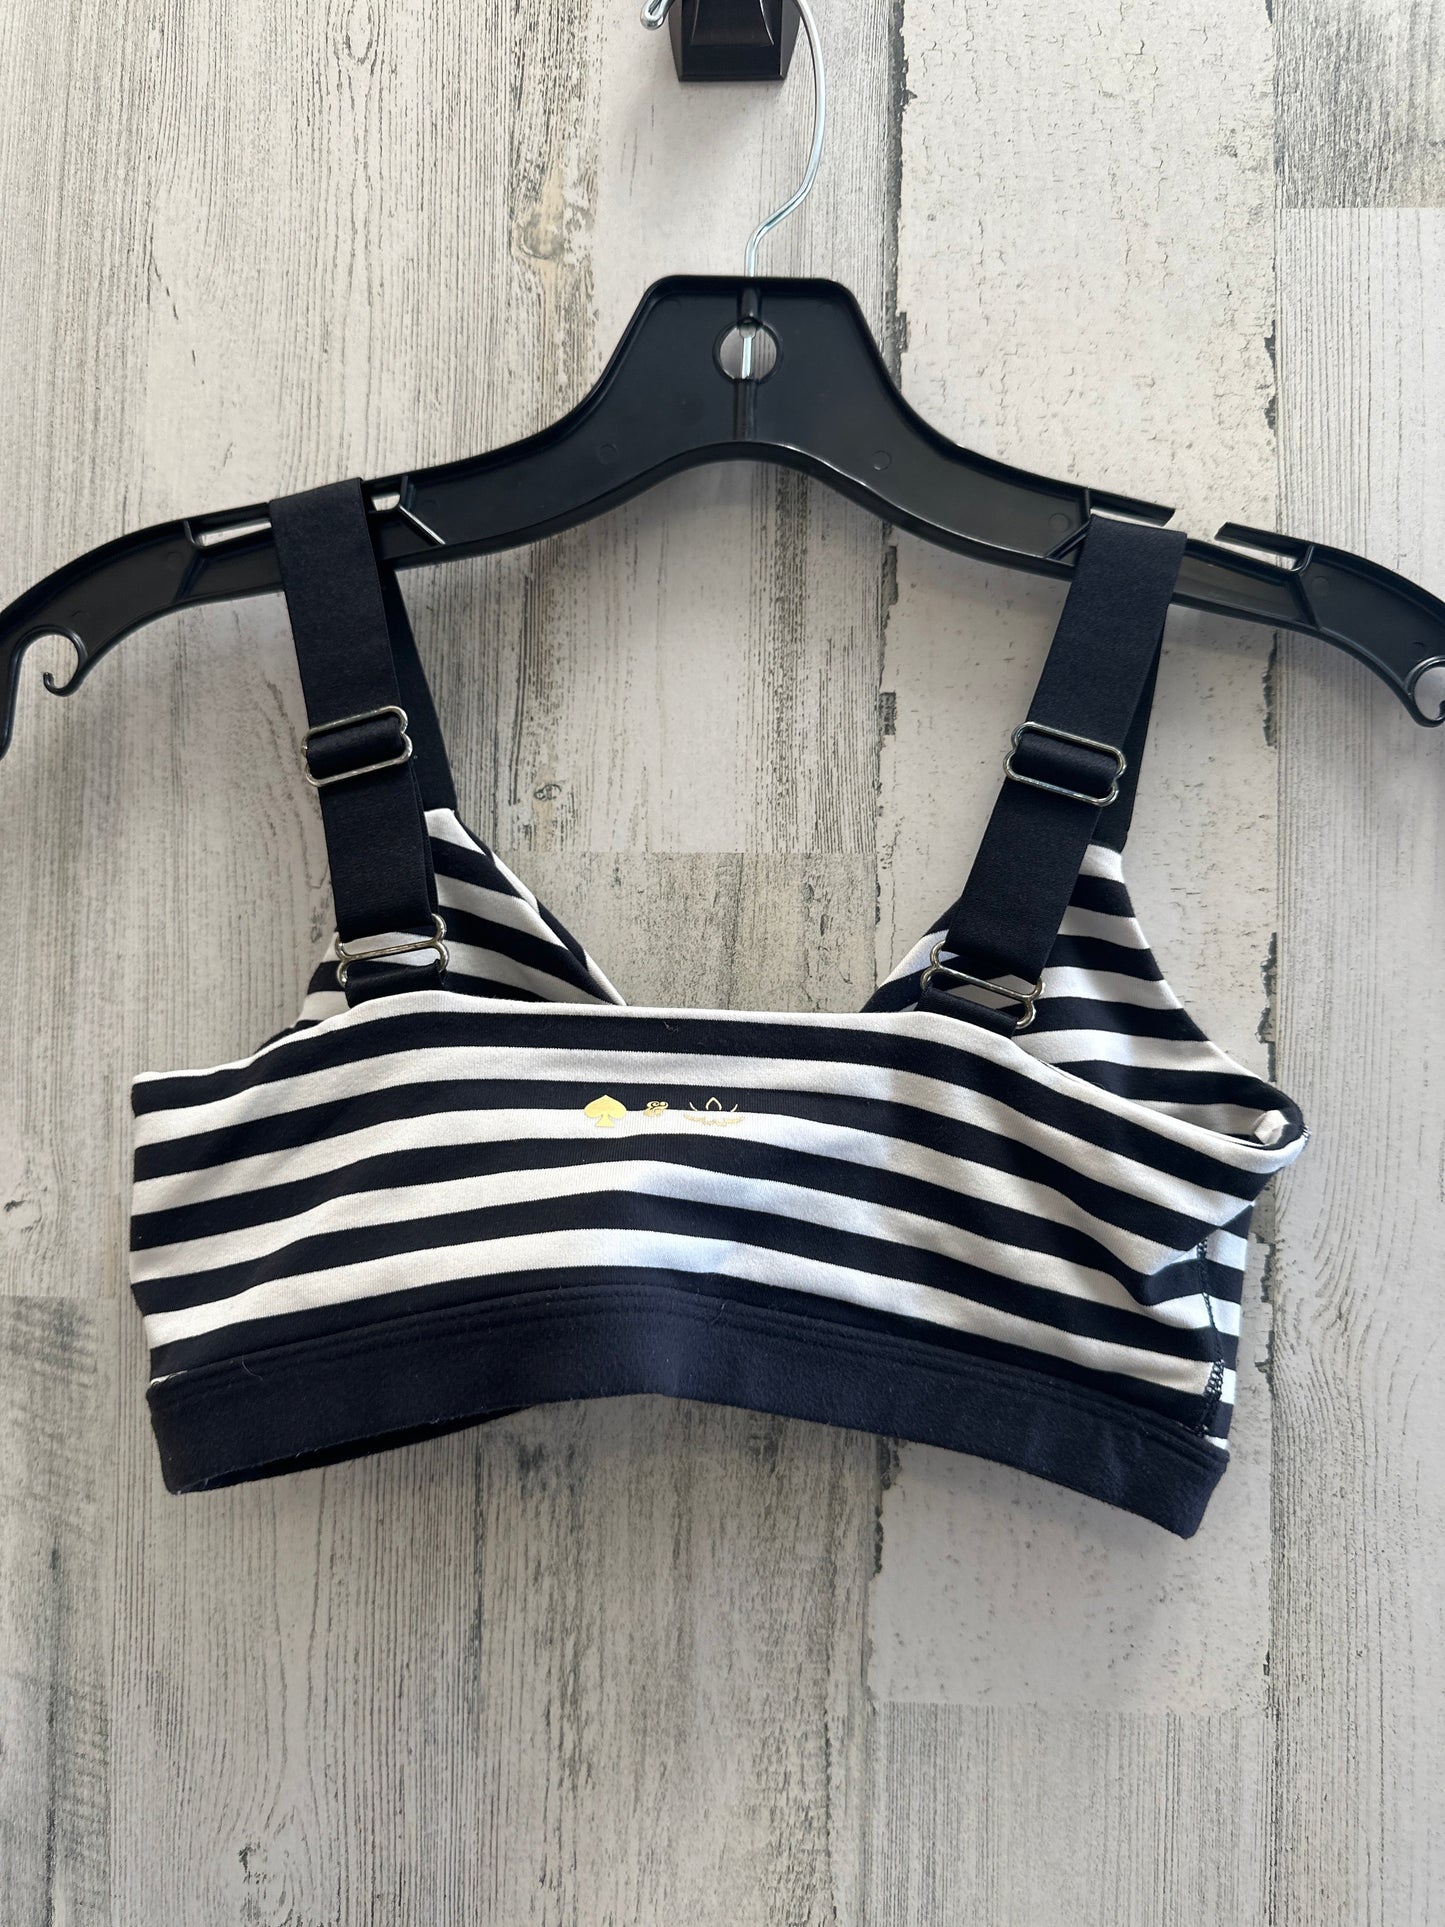 Athletic Bra By Kate Spade  Size: S